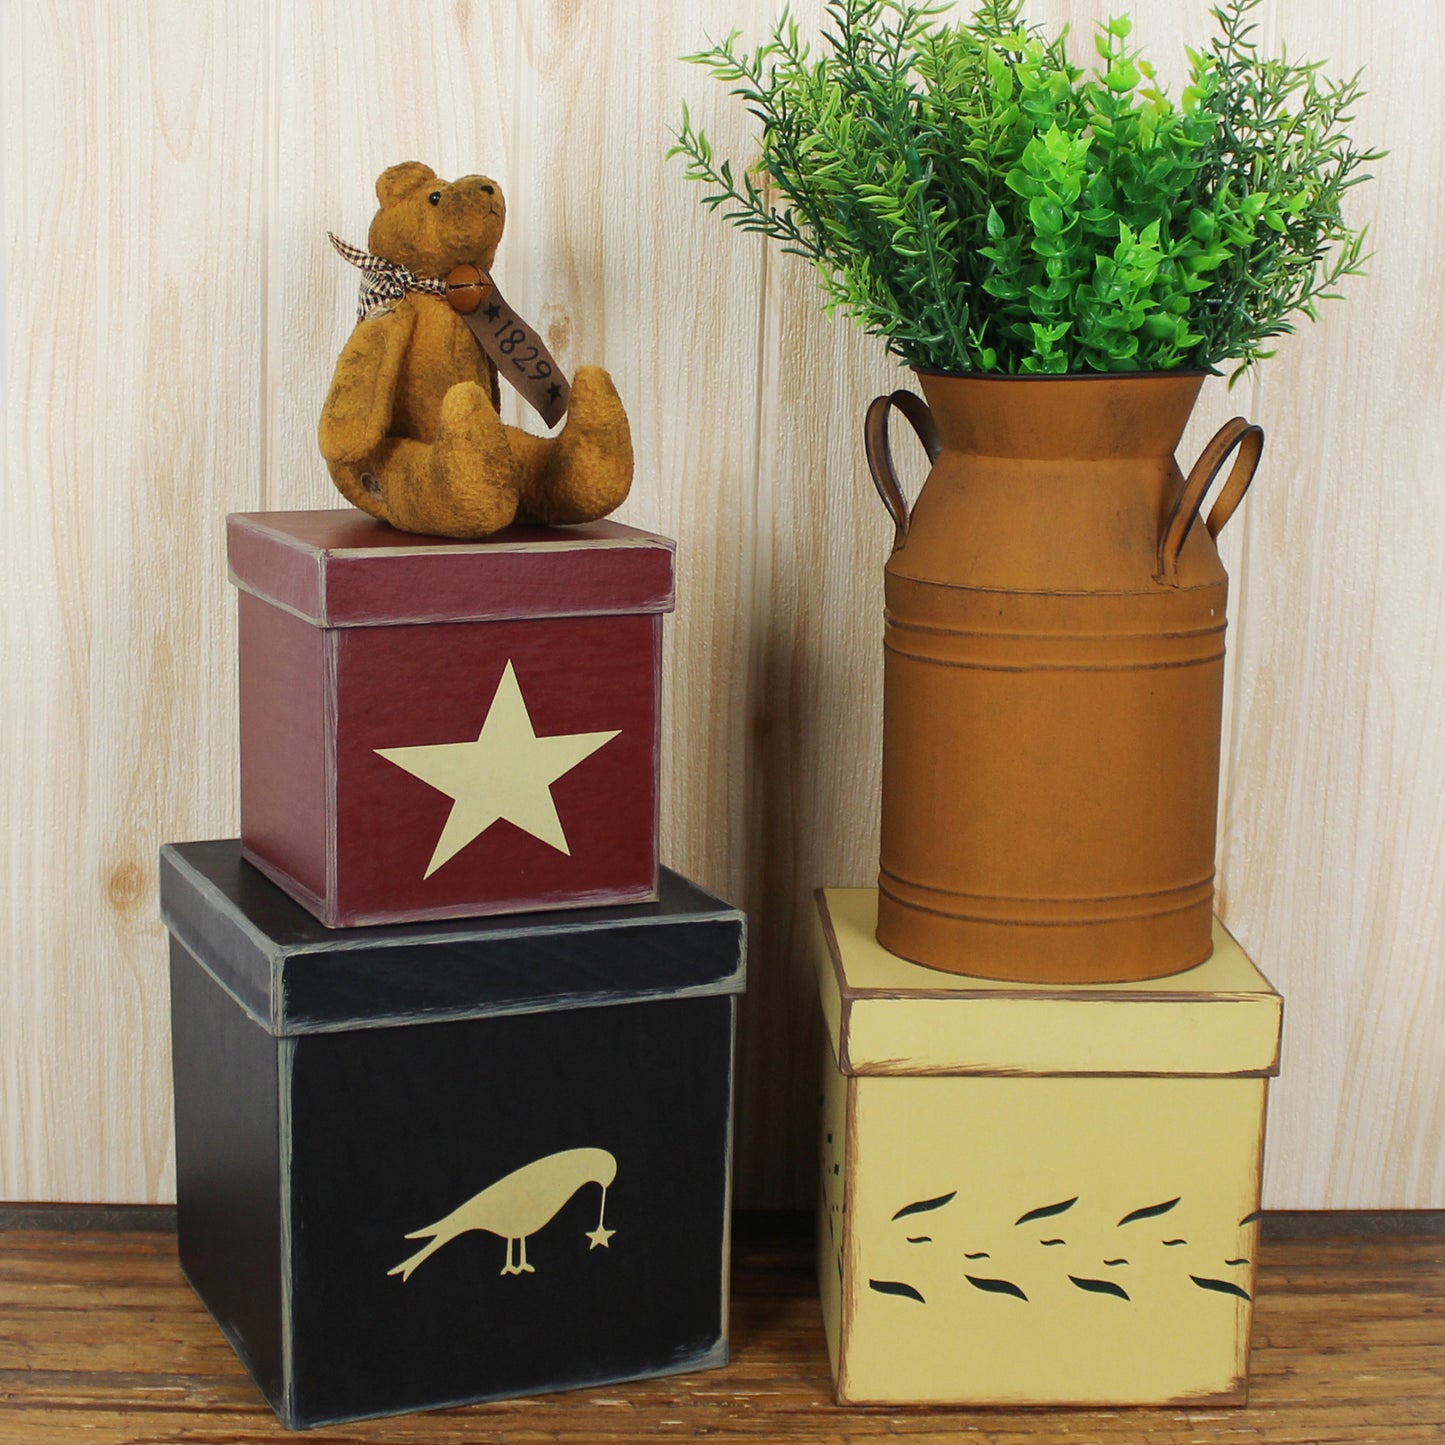 CVHOMEDECO. Primitive Country Cubic Star Crow Cardboard Nesting Boxes, 8/7/6 Inch. Set of 3.